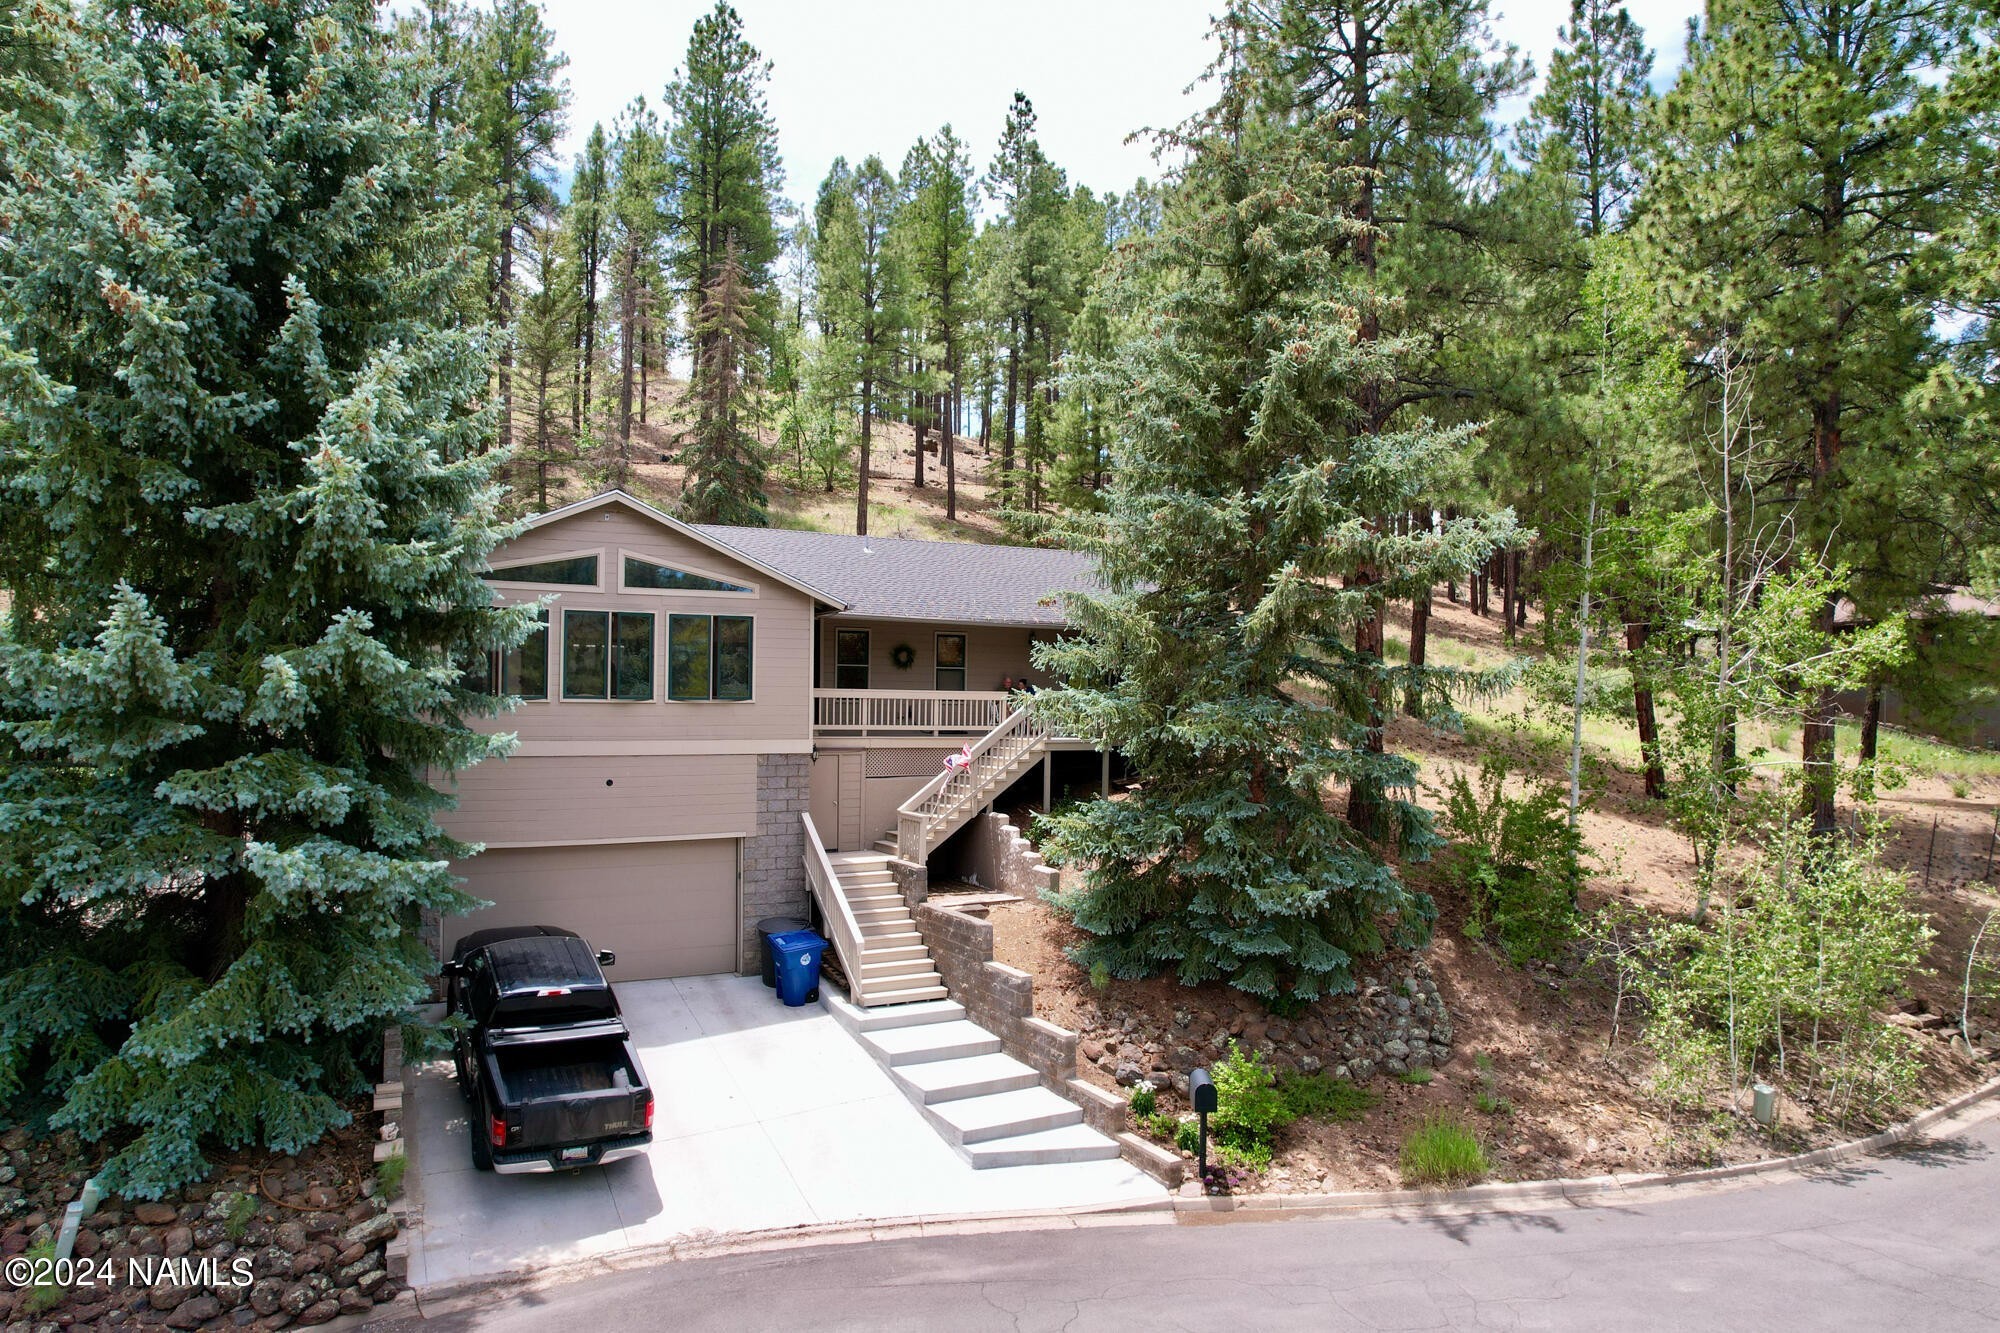 38. 3009 W Foothills Way